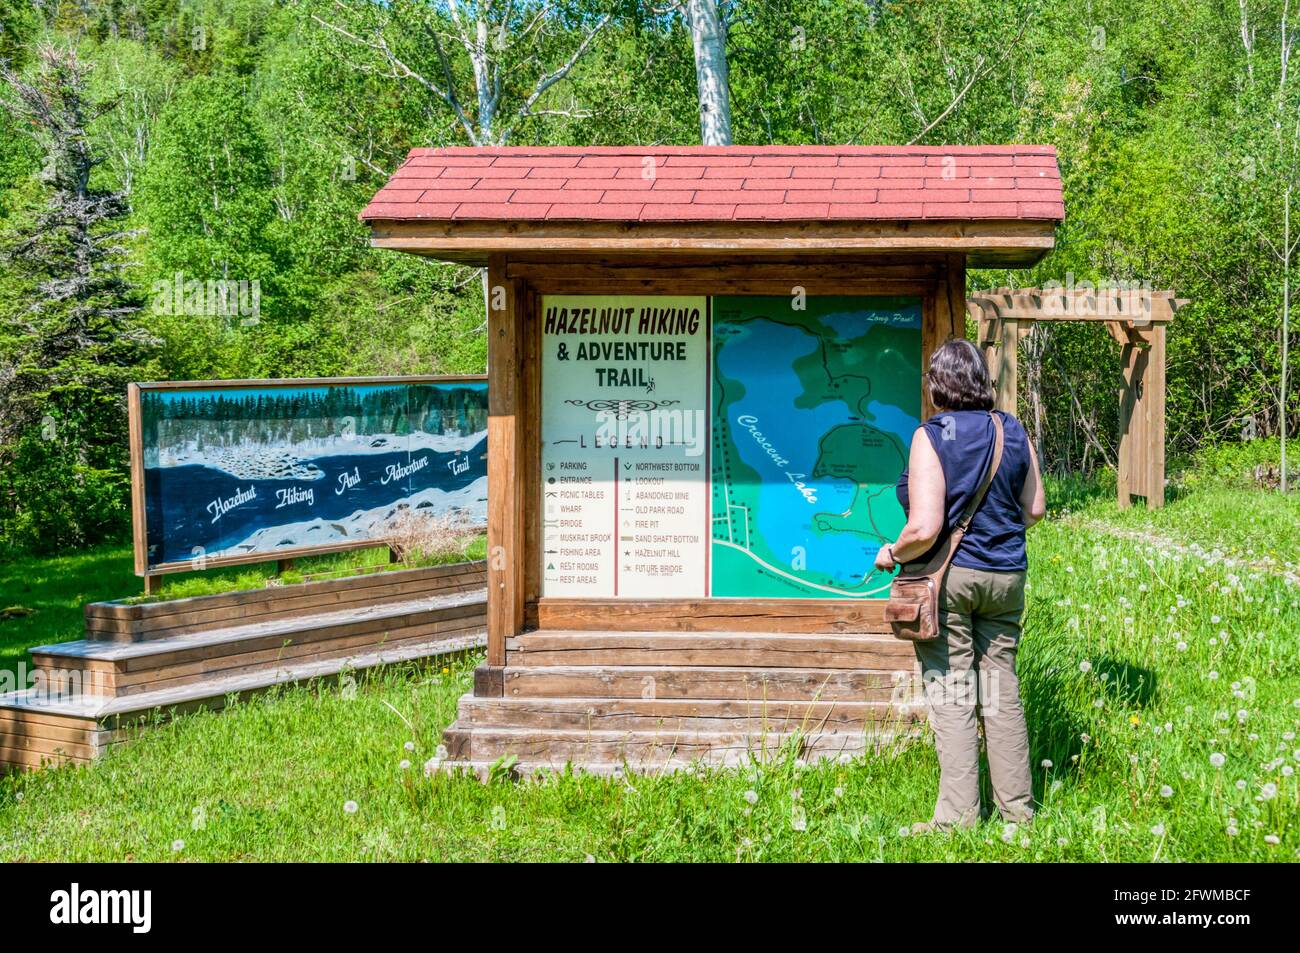 A tourist reading the signs at the start of the Hazelnut Hiking & Adventure Trail around Crescent Lake at Robert's Arm, Newfoundland. Stock Photo